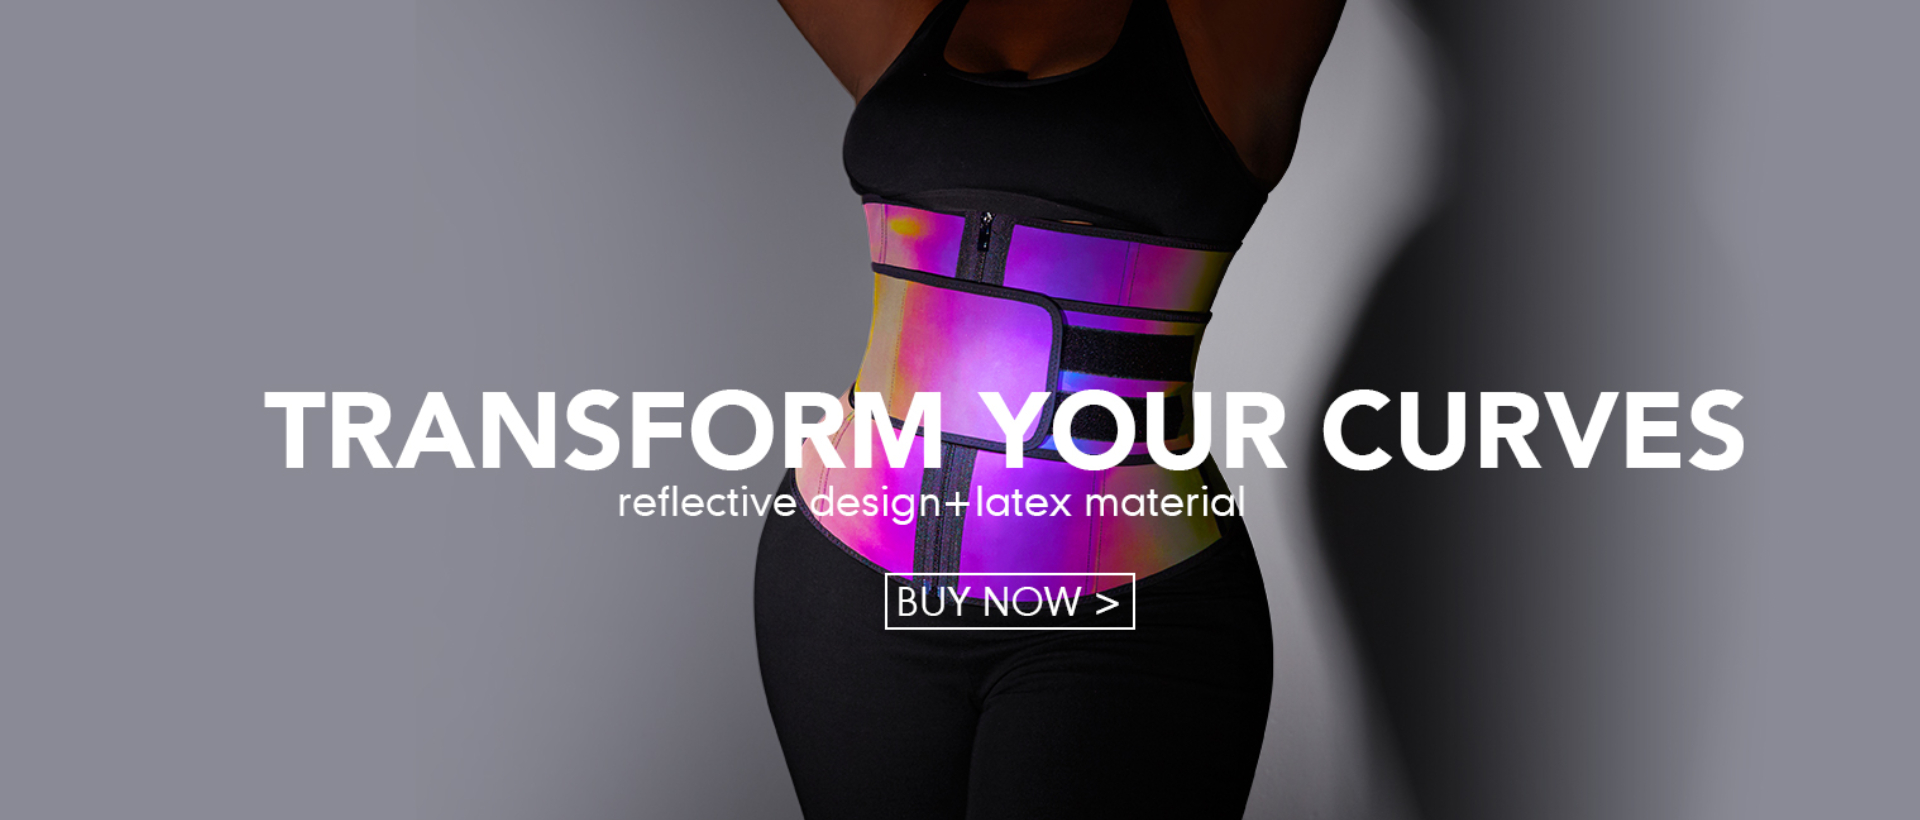 writing down my emotions: Shop for Waist Trainer and Shapewear at Lover- Beauty